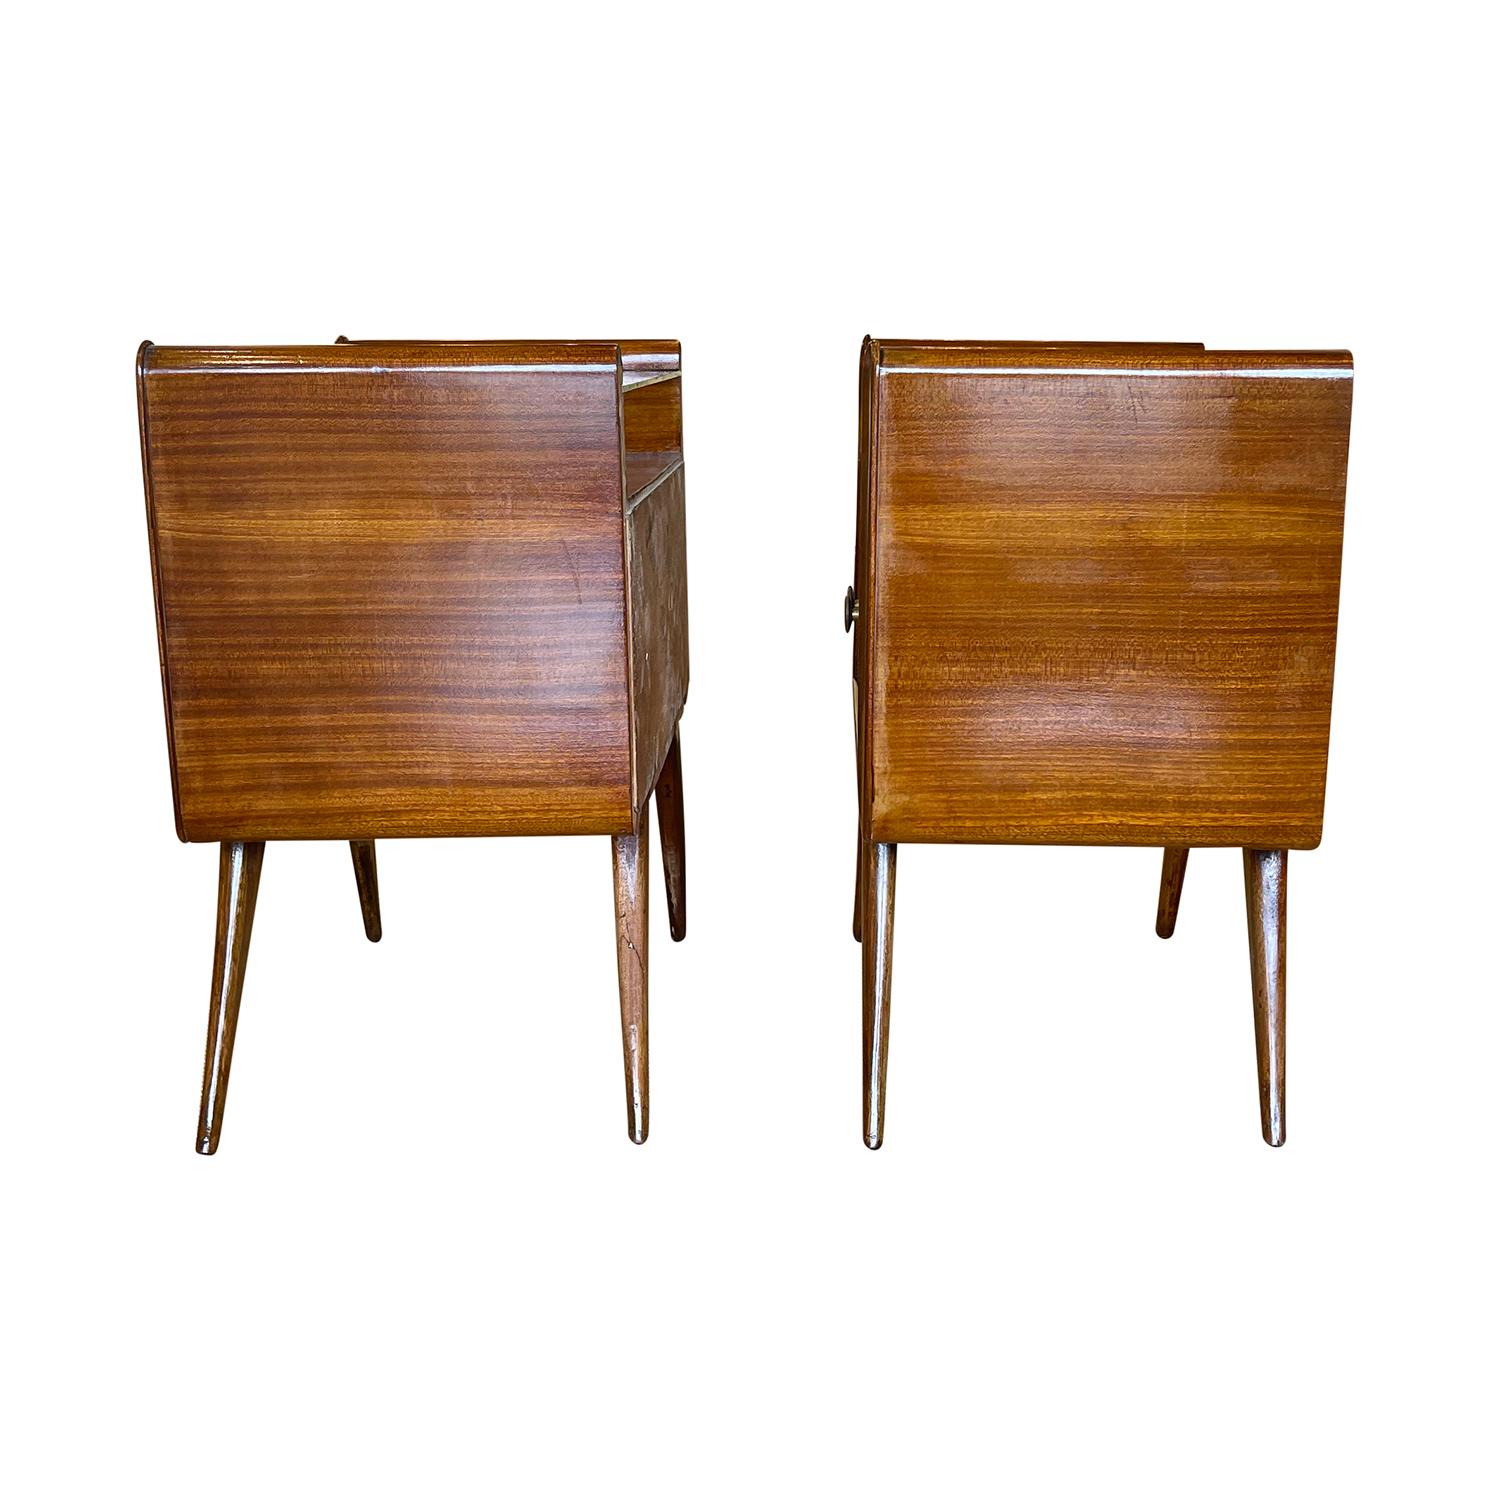 Metal 20th Century Italian Pair of Walnut Nightstands, Bedside Tables by Paolo Buffa